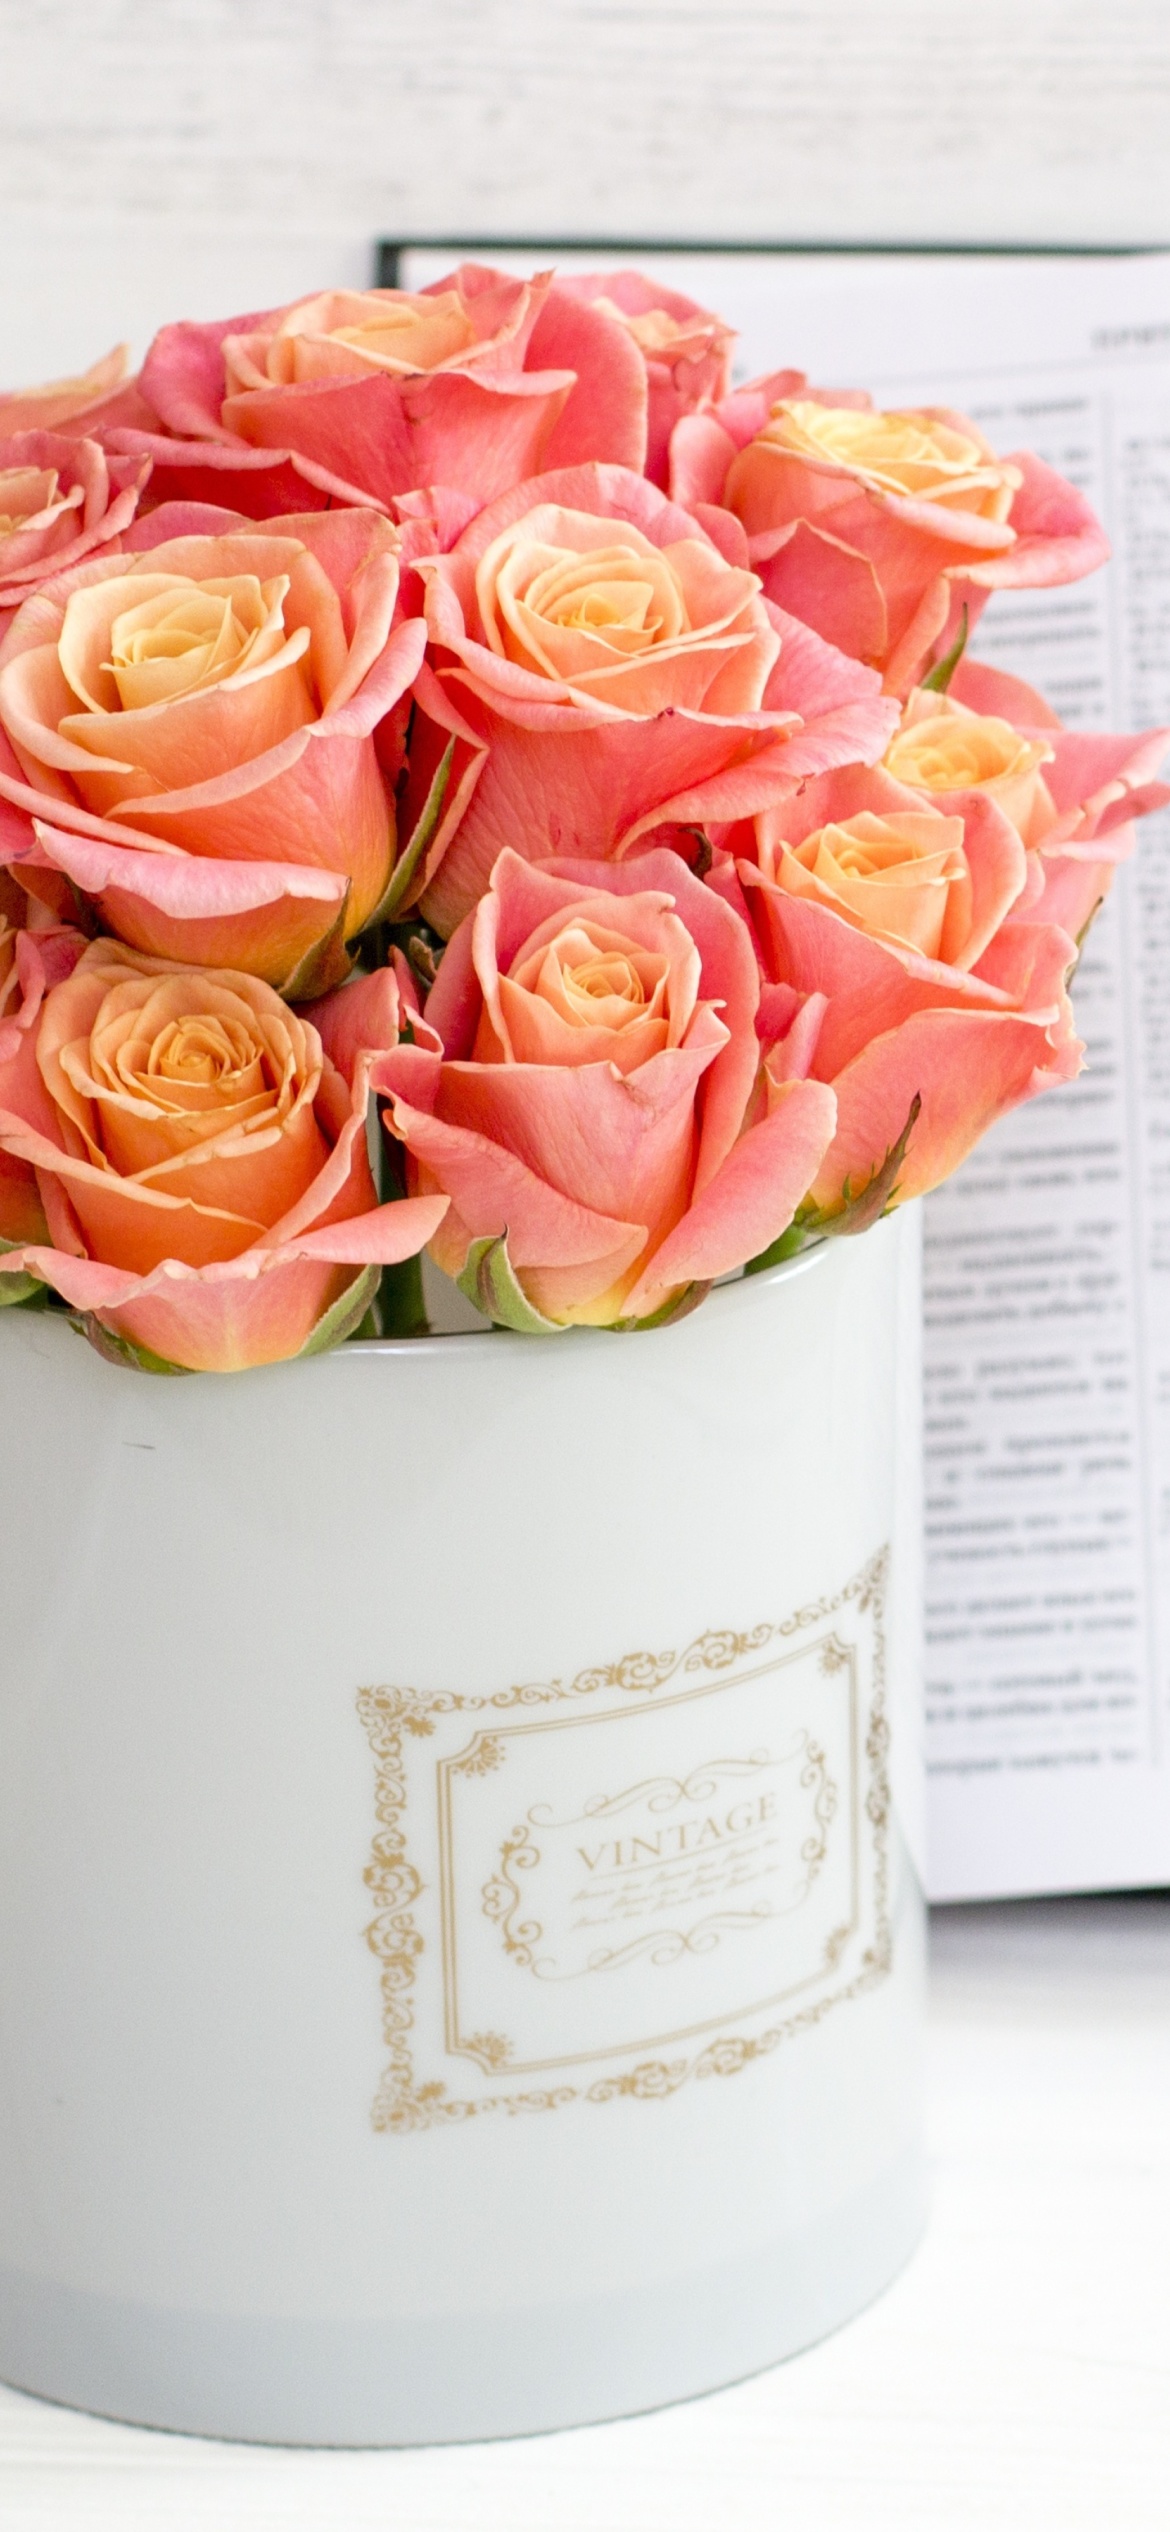 Roses and Book wallpaper 1170x2532